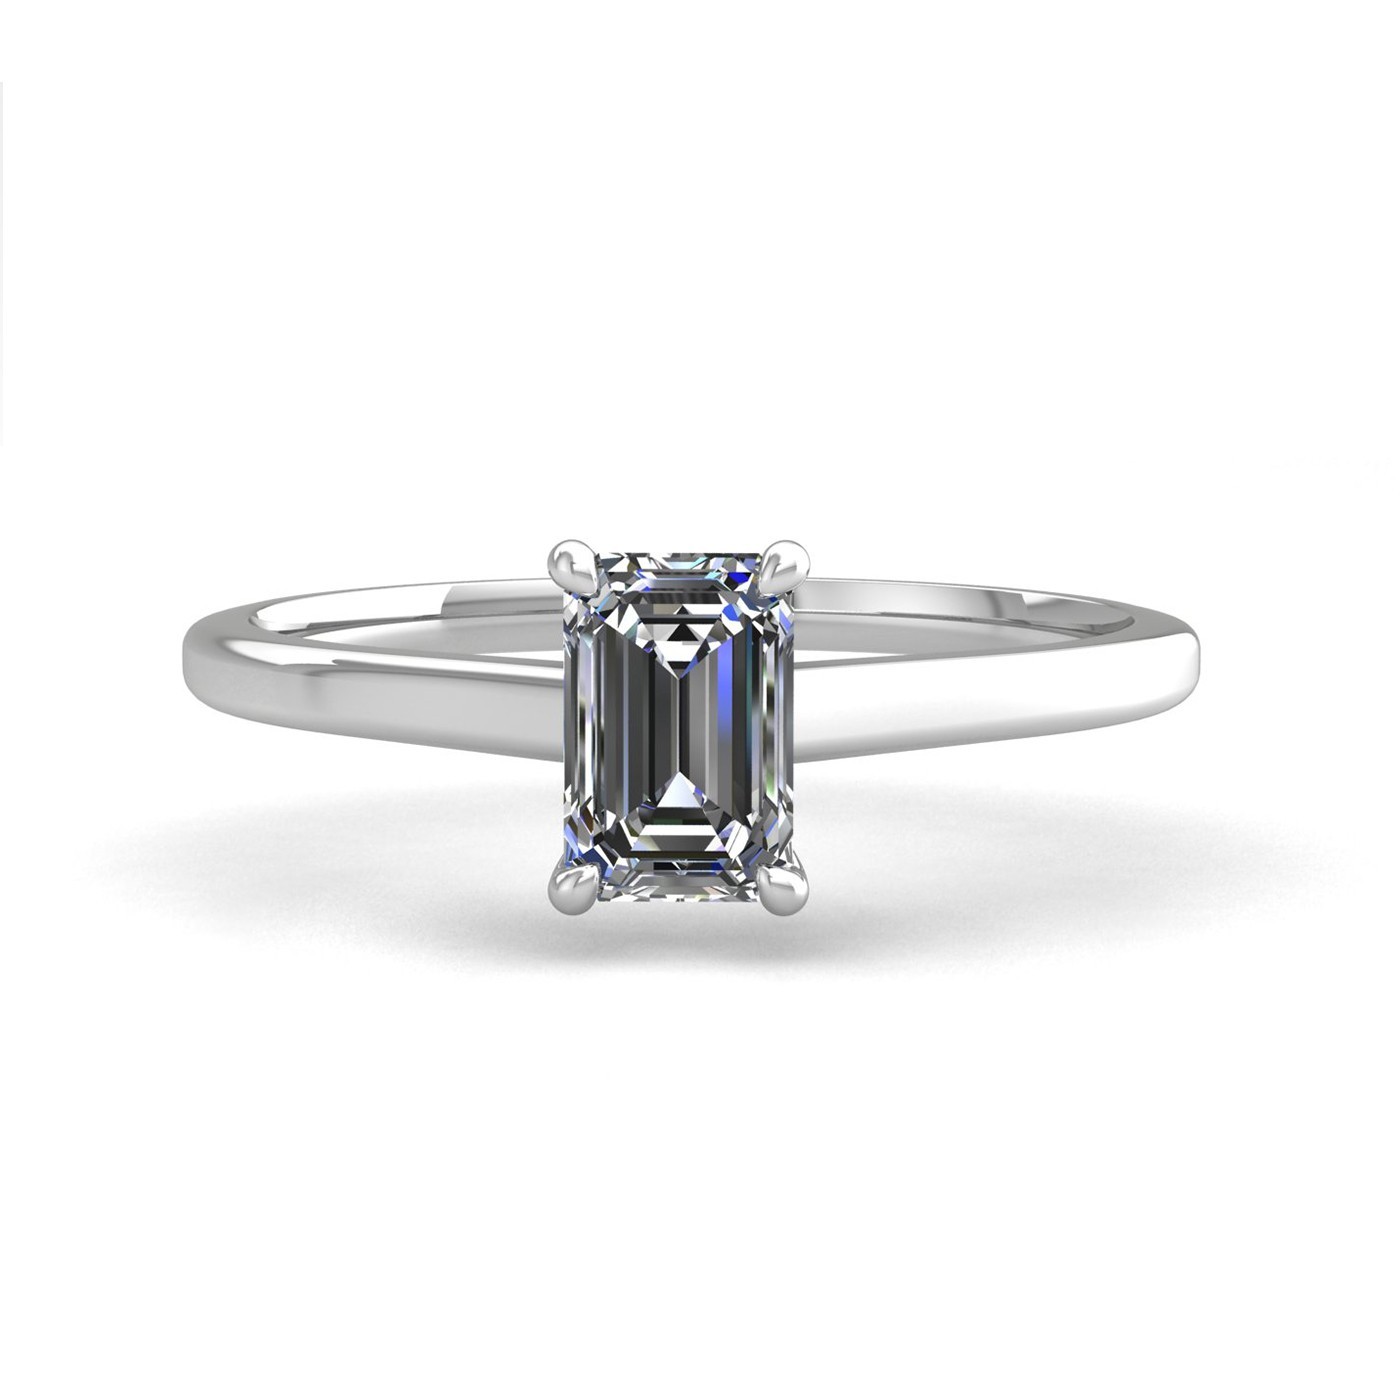 18k white gold  0,30 ct 4 prongs solitaire emerald cut diamond engagement ring with whisper thin band Photos & images